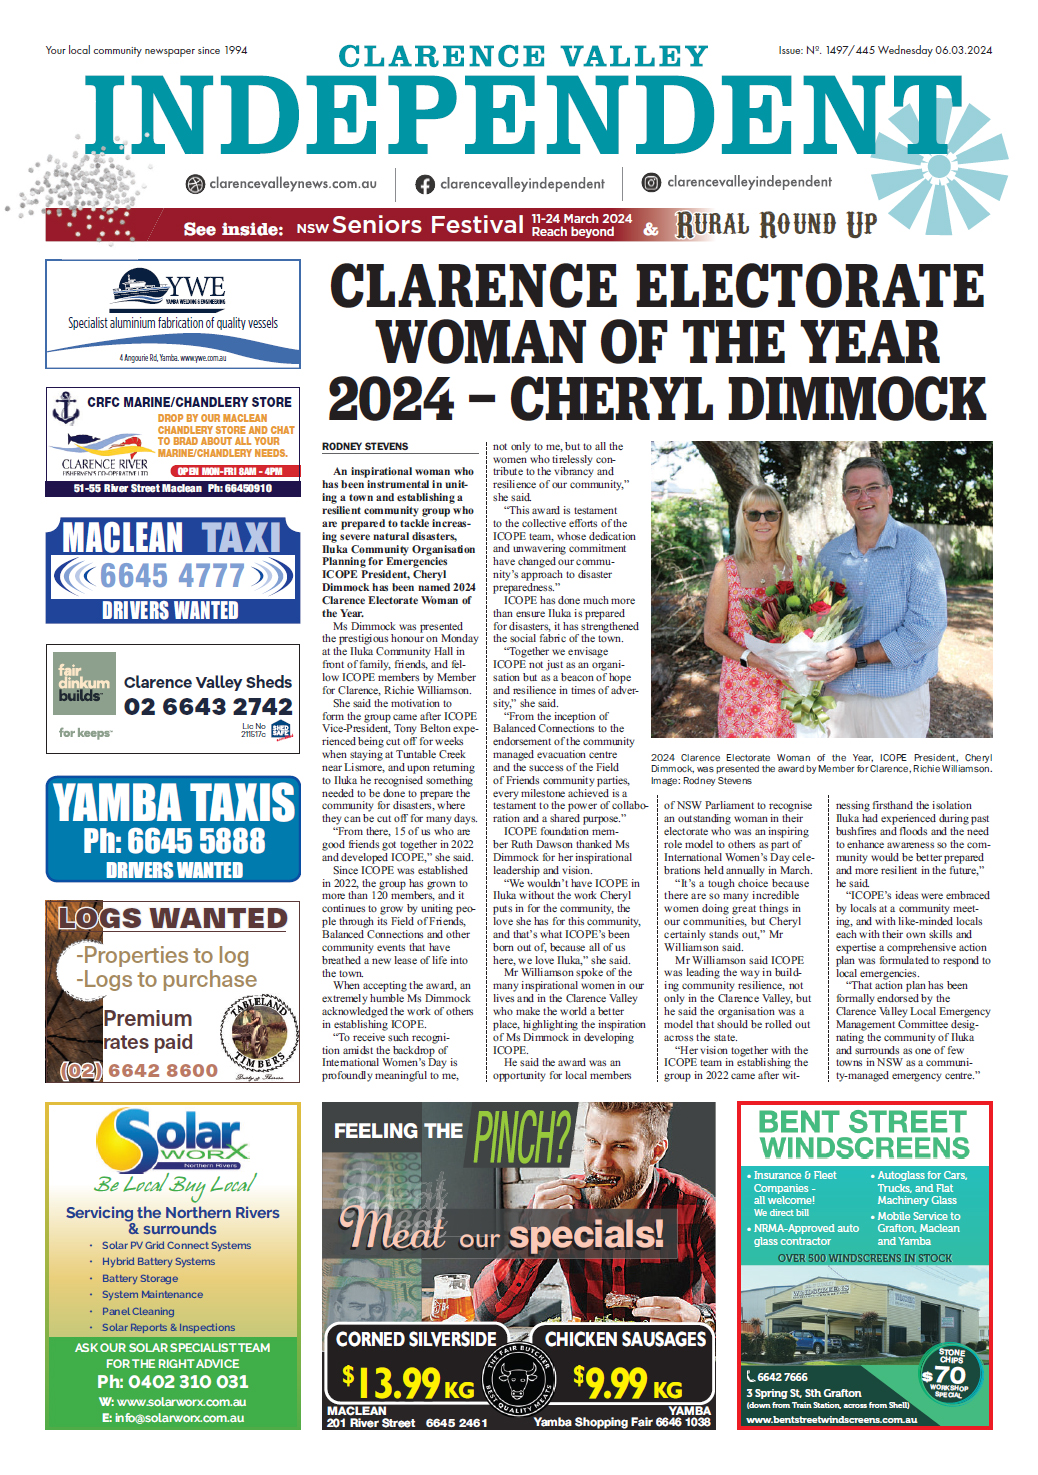 Clarence Valley Independent 6 March 2024